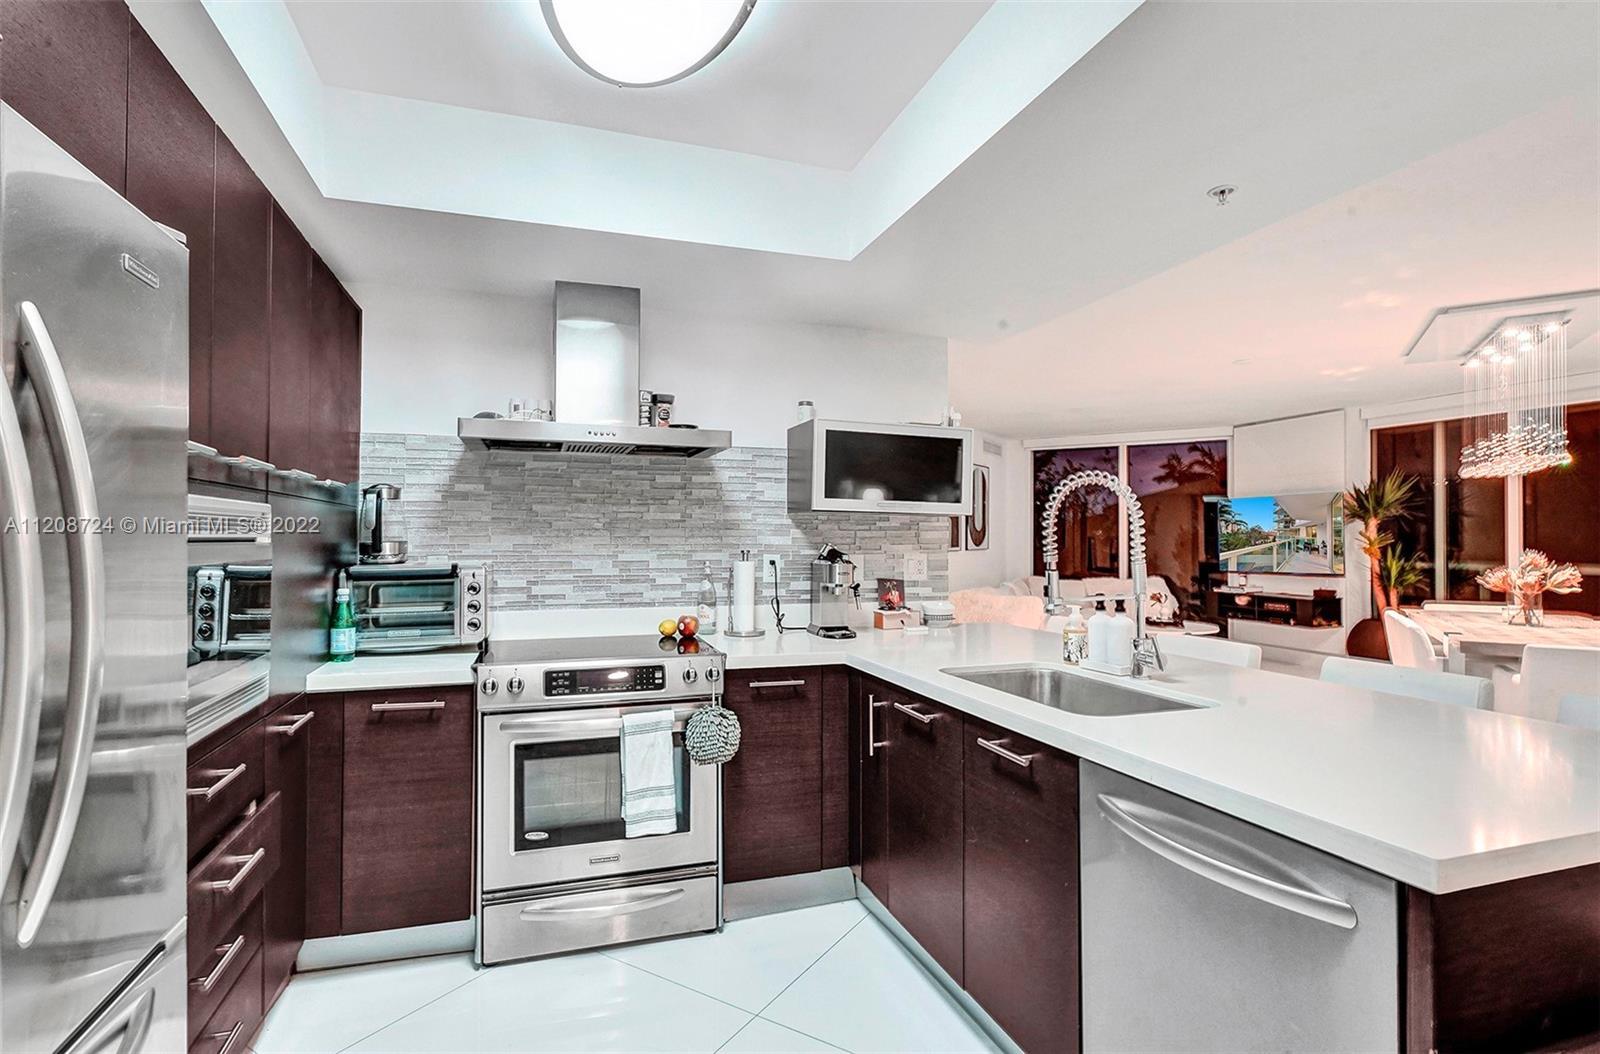 LOWEST PRICED 3 Bed/2 Bath unit at St Tropez III offering European-style kitchen, stainless steel ap